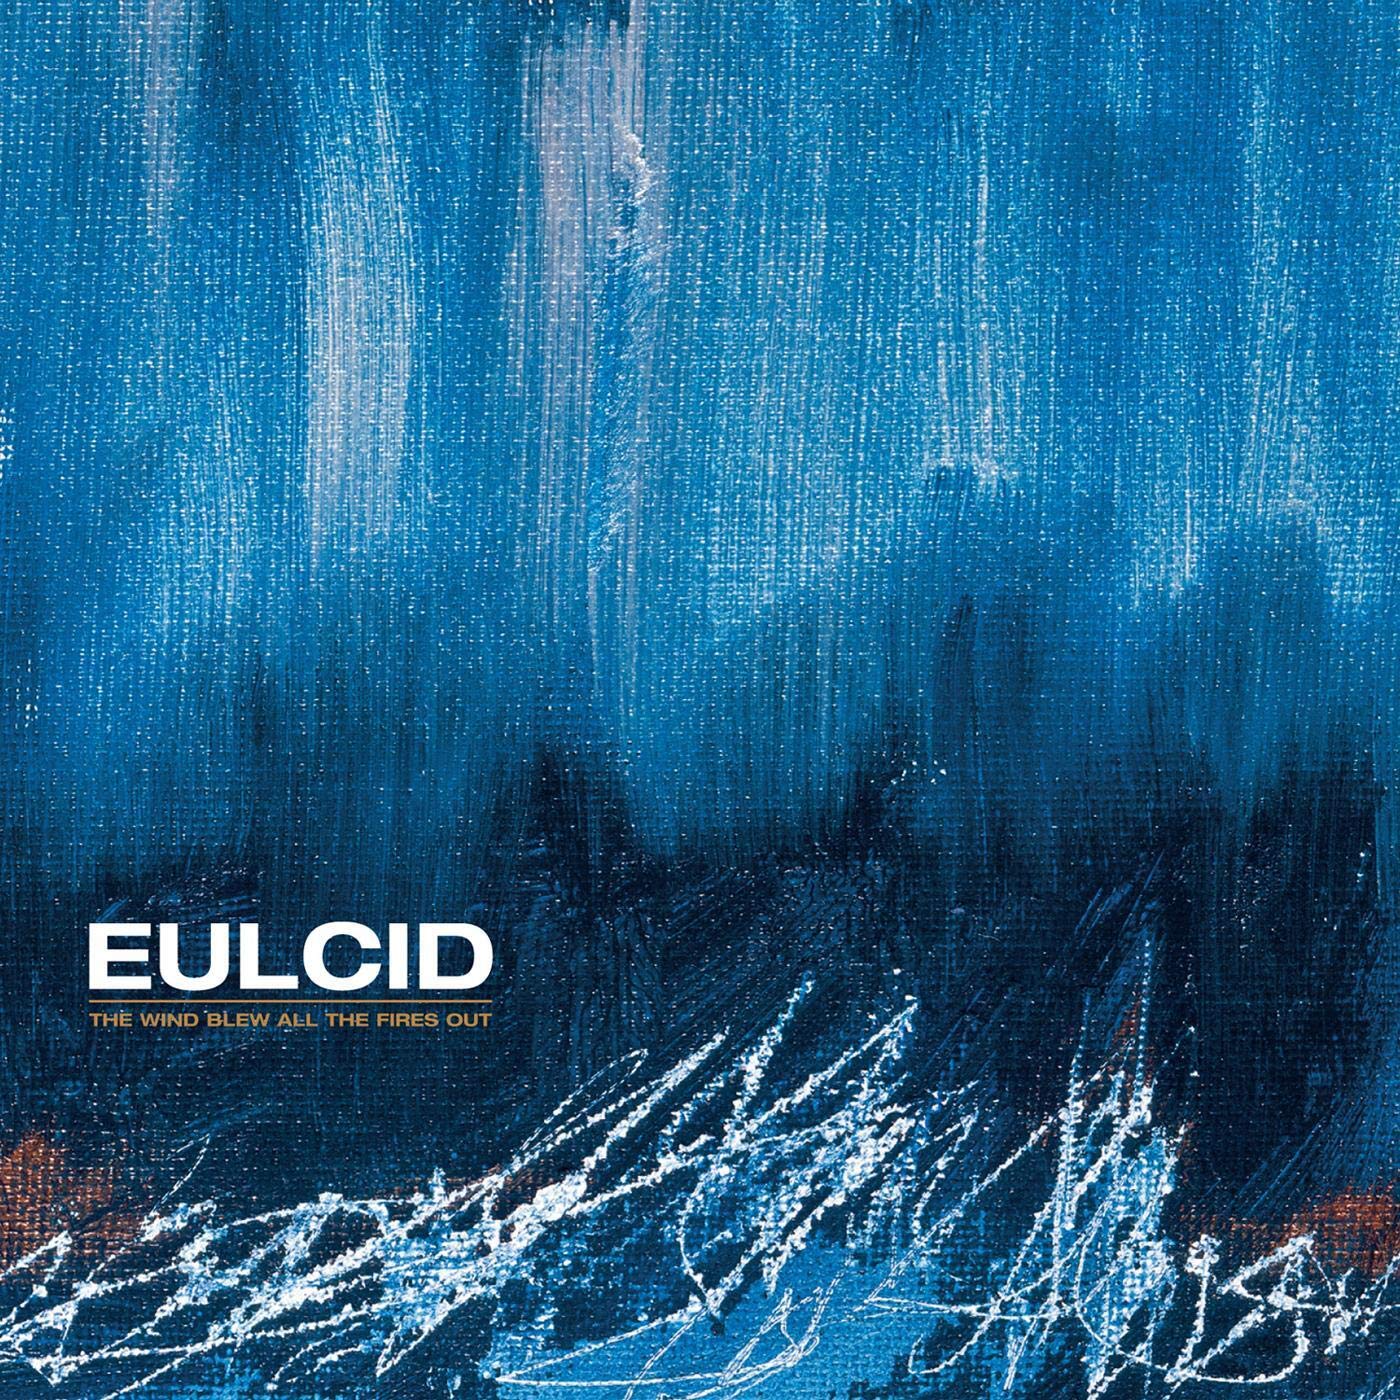 Eulcid - The Wind Blew All the Fires Out (2000) FLAC Download